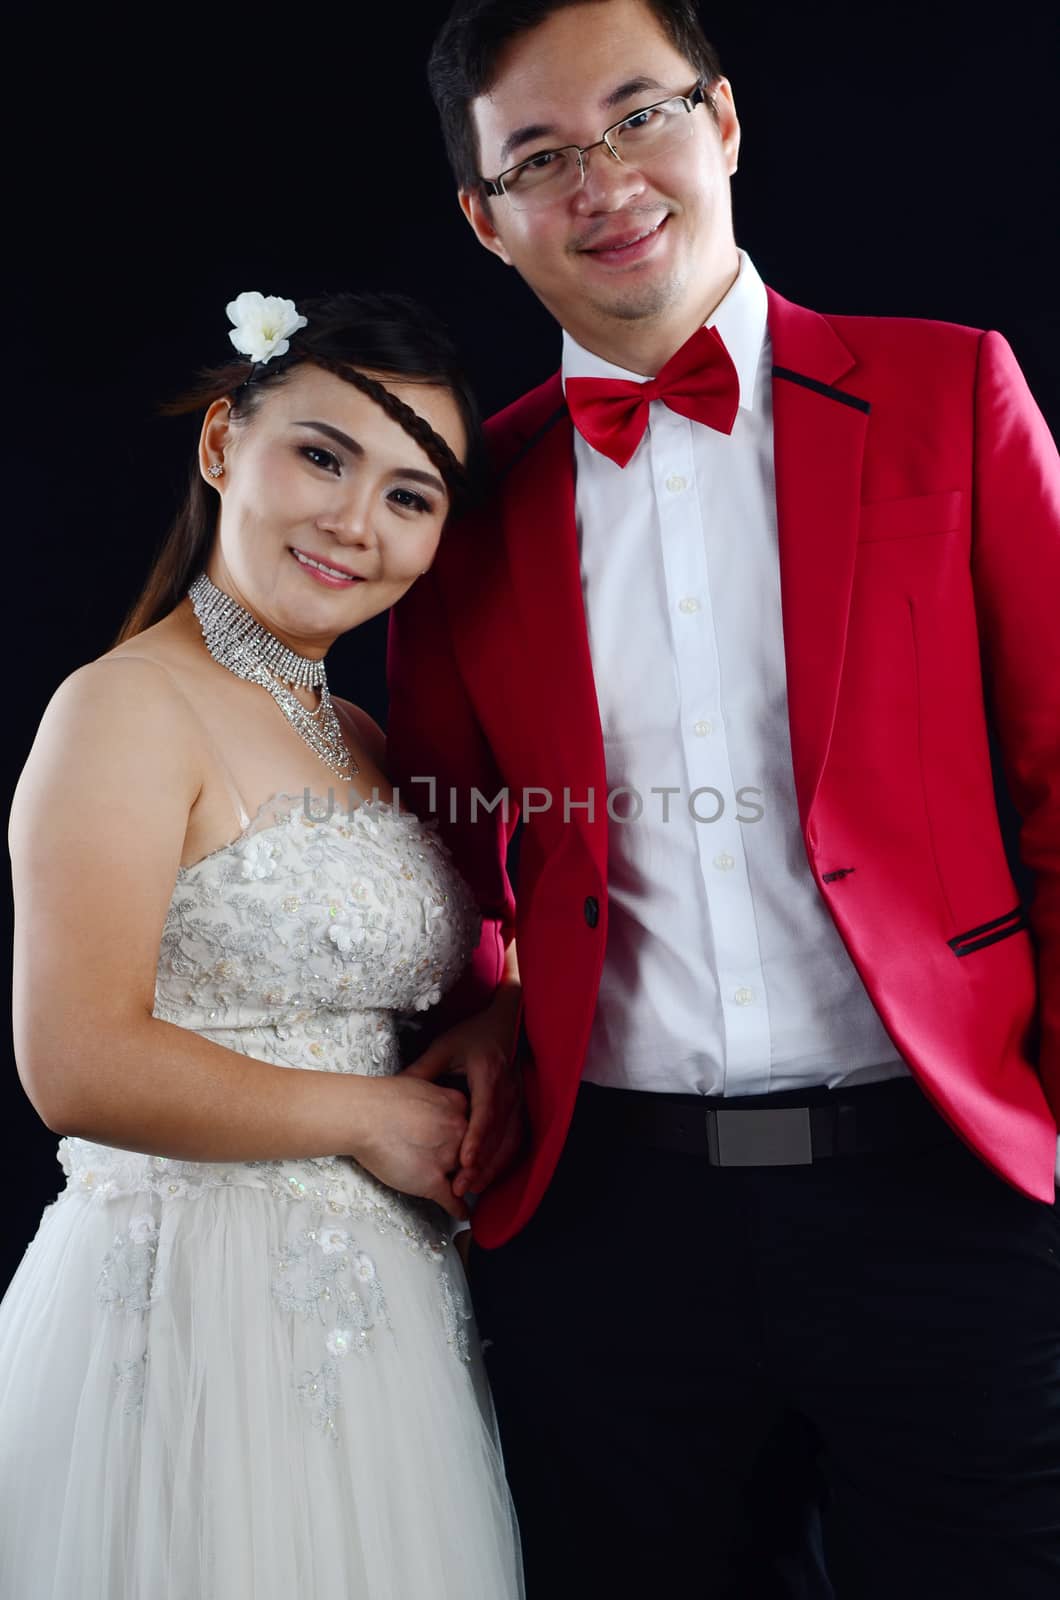 Portrait of young elegant enamoured just married groom and bride embracing at Wedding on black background